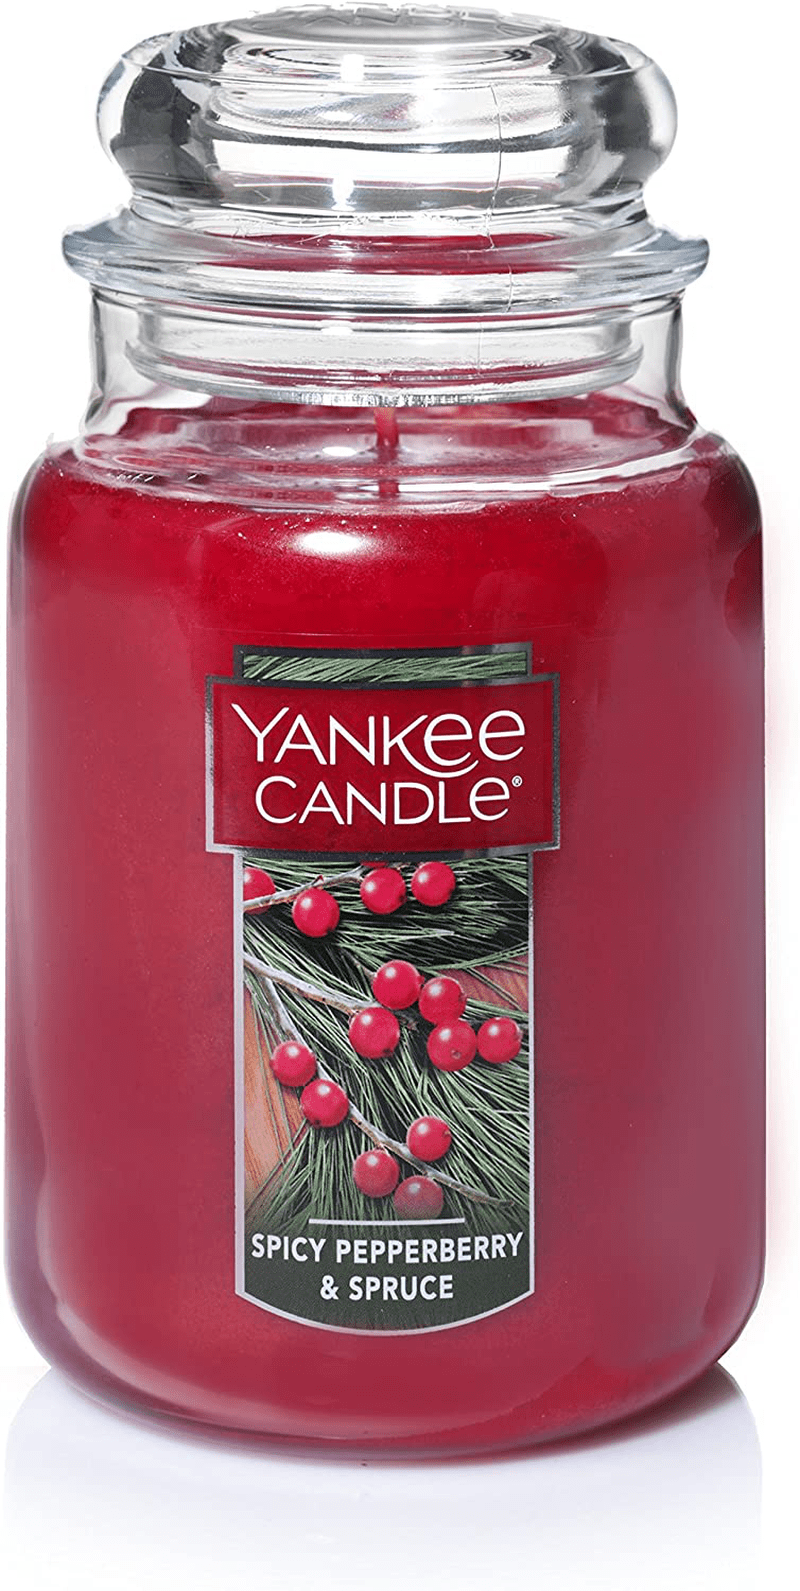 Yankee Candle Large Jar Candle Home Sweet Home